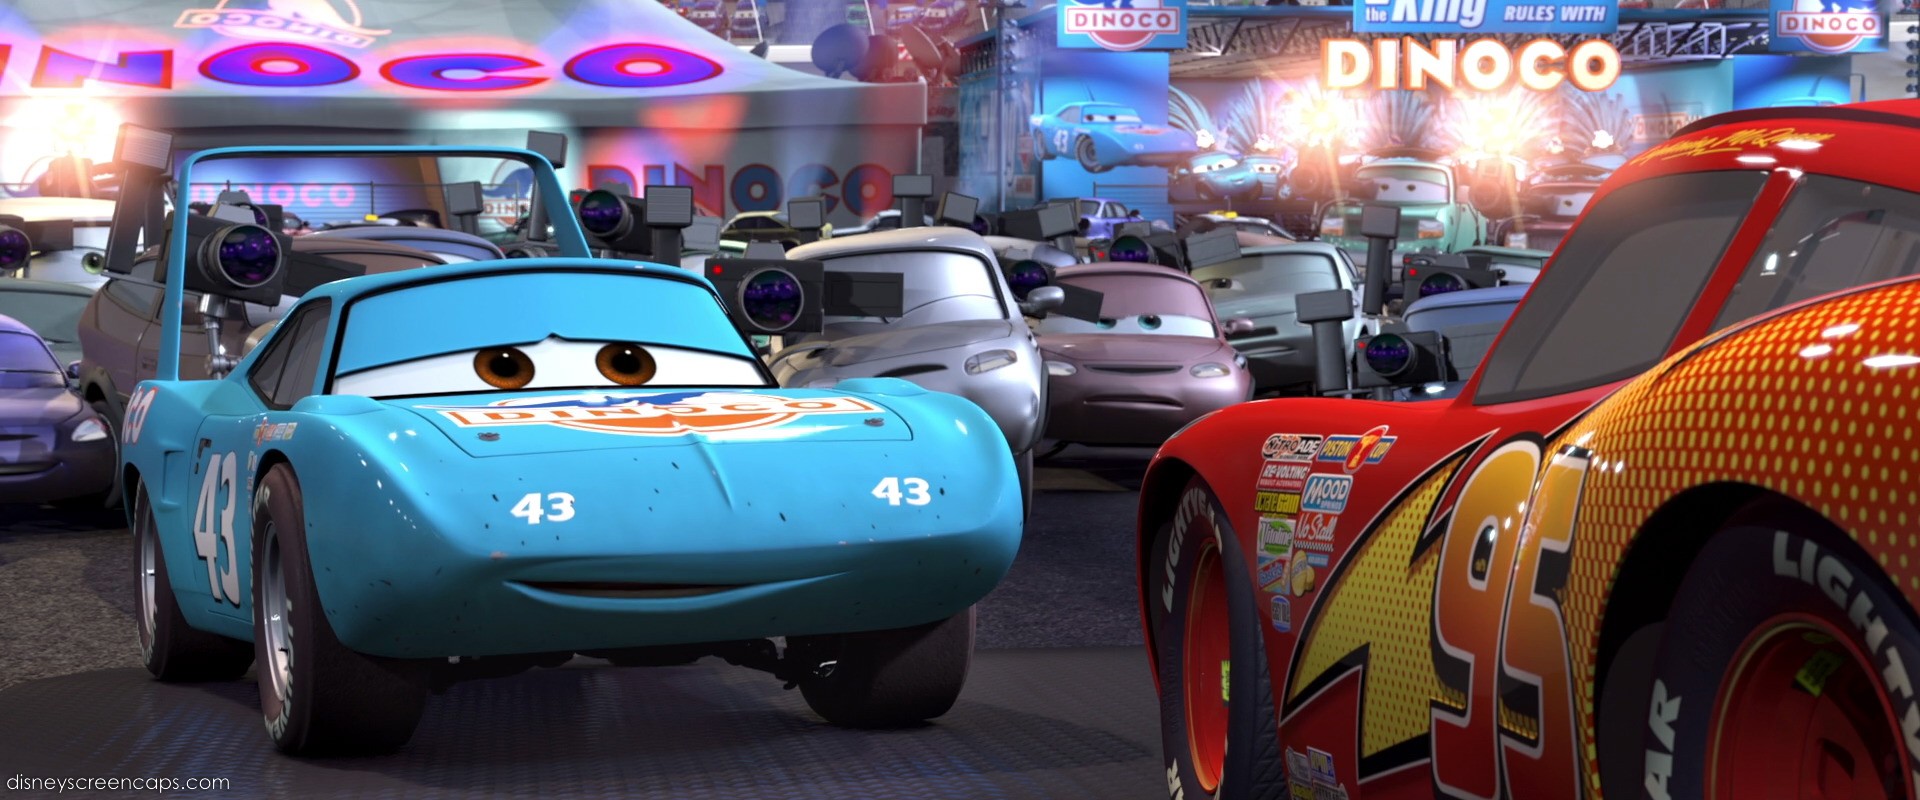 disney cars the king strip weathers